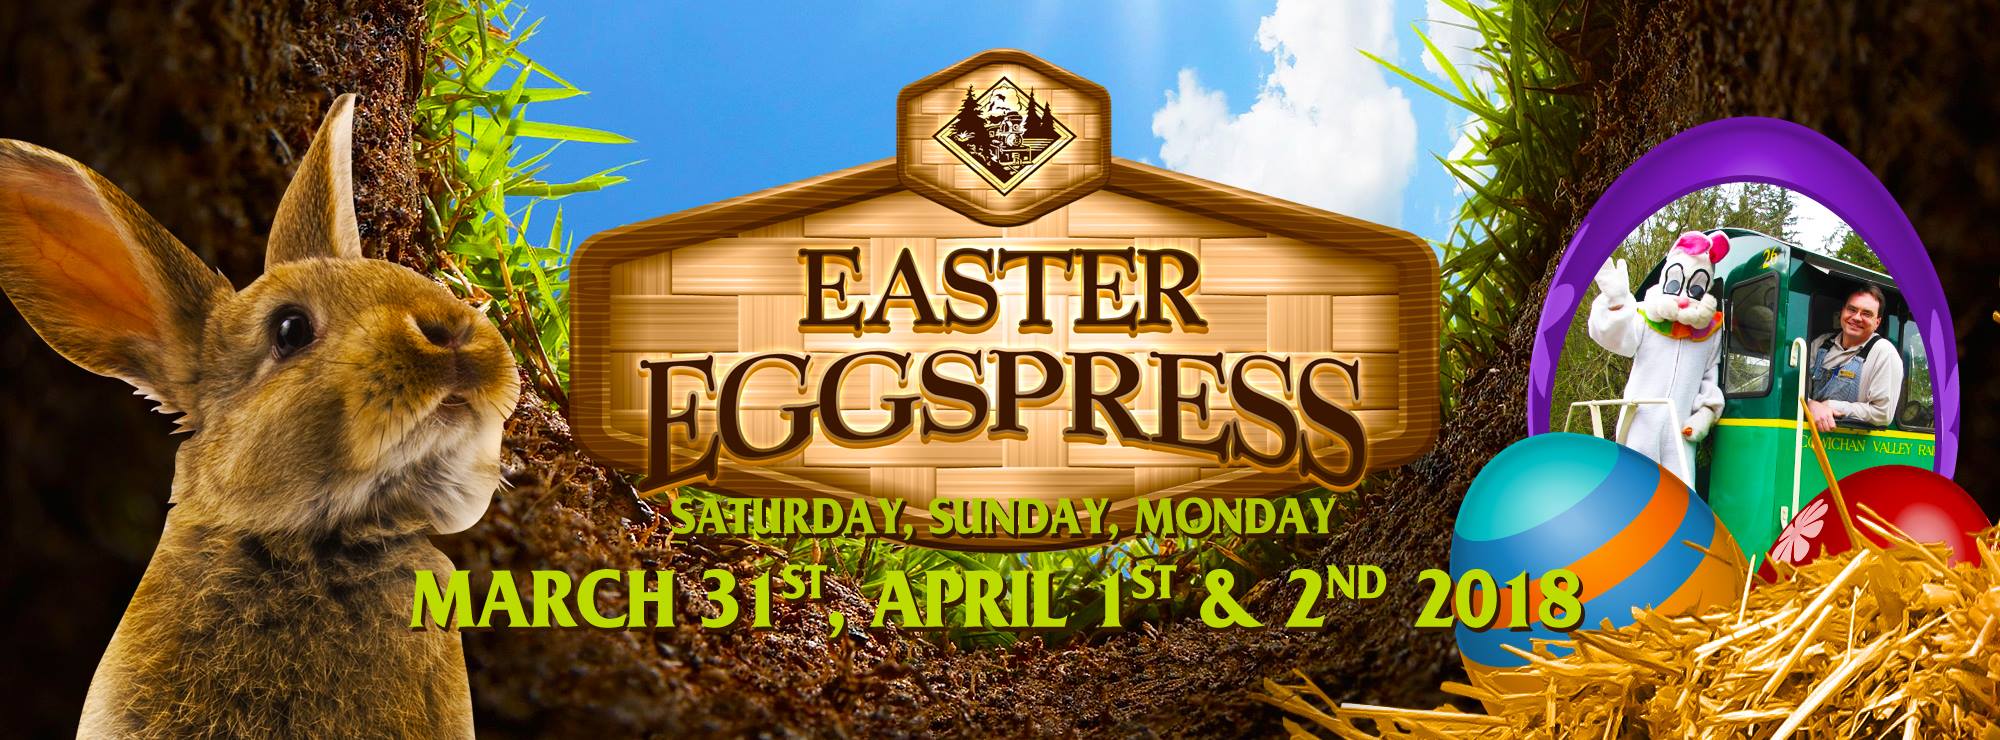 Poster for Easter Train ride dubbed the Easter Express.